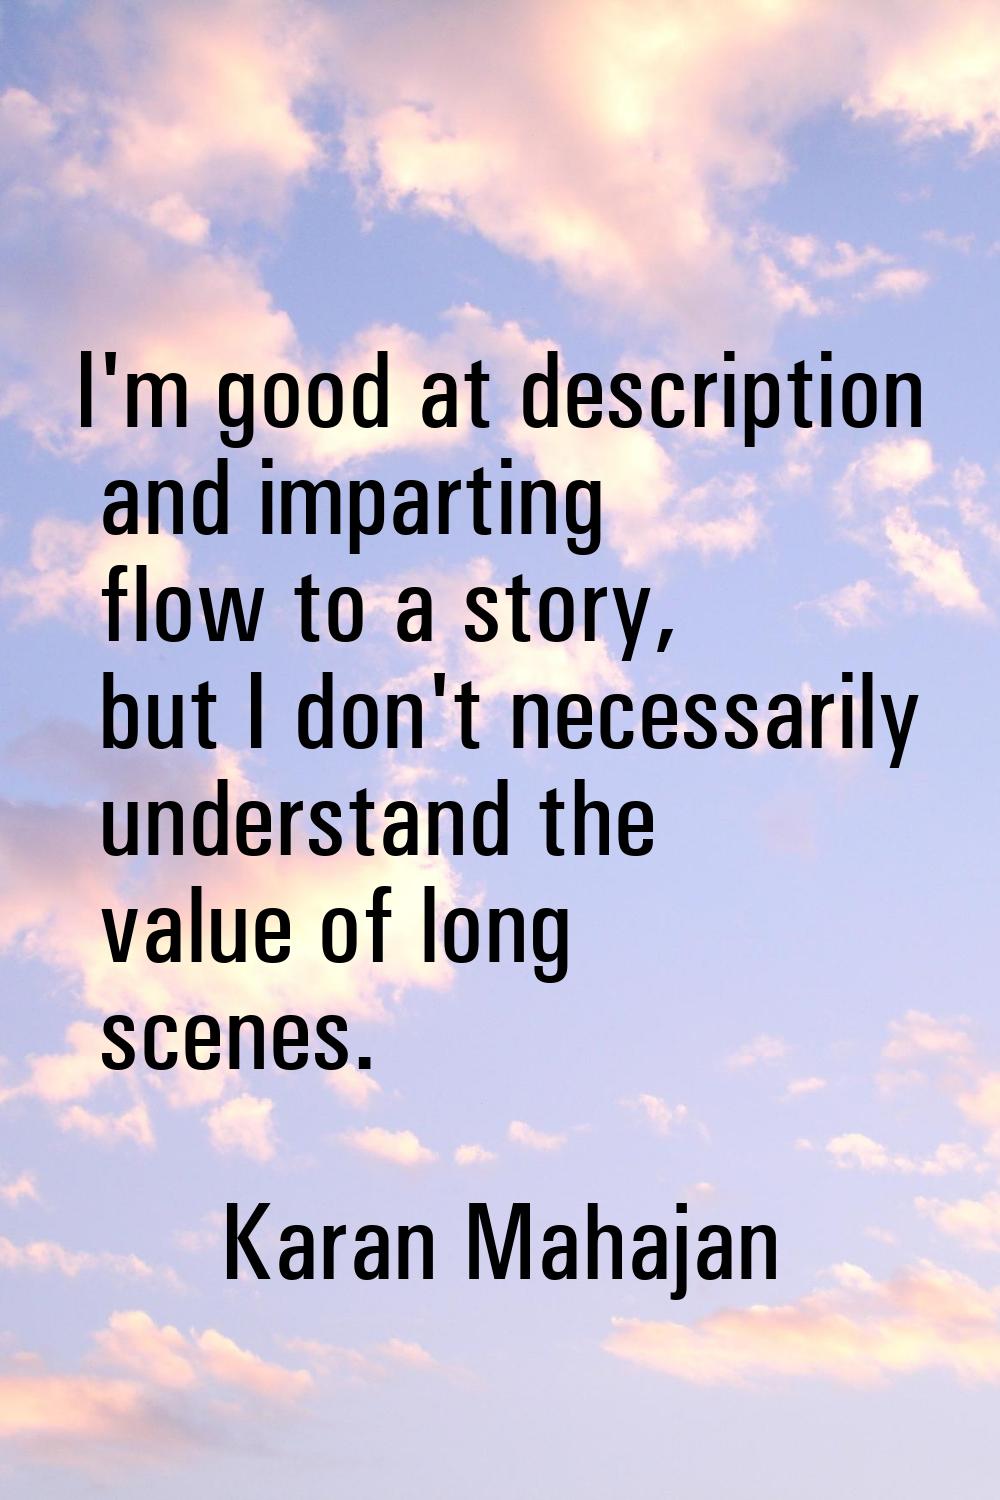 I'm good at description and imparting flow to a story, but I don't necessarily understand the value